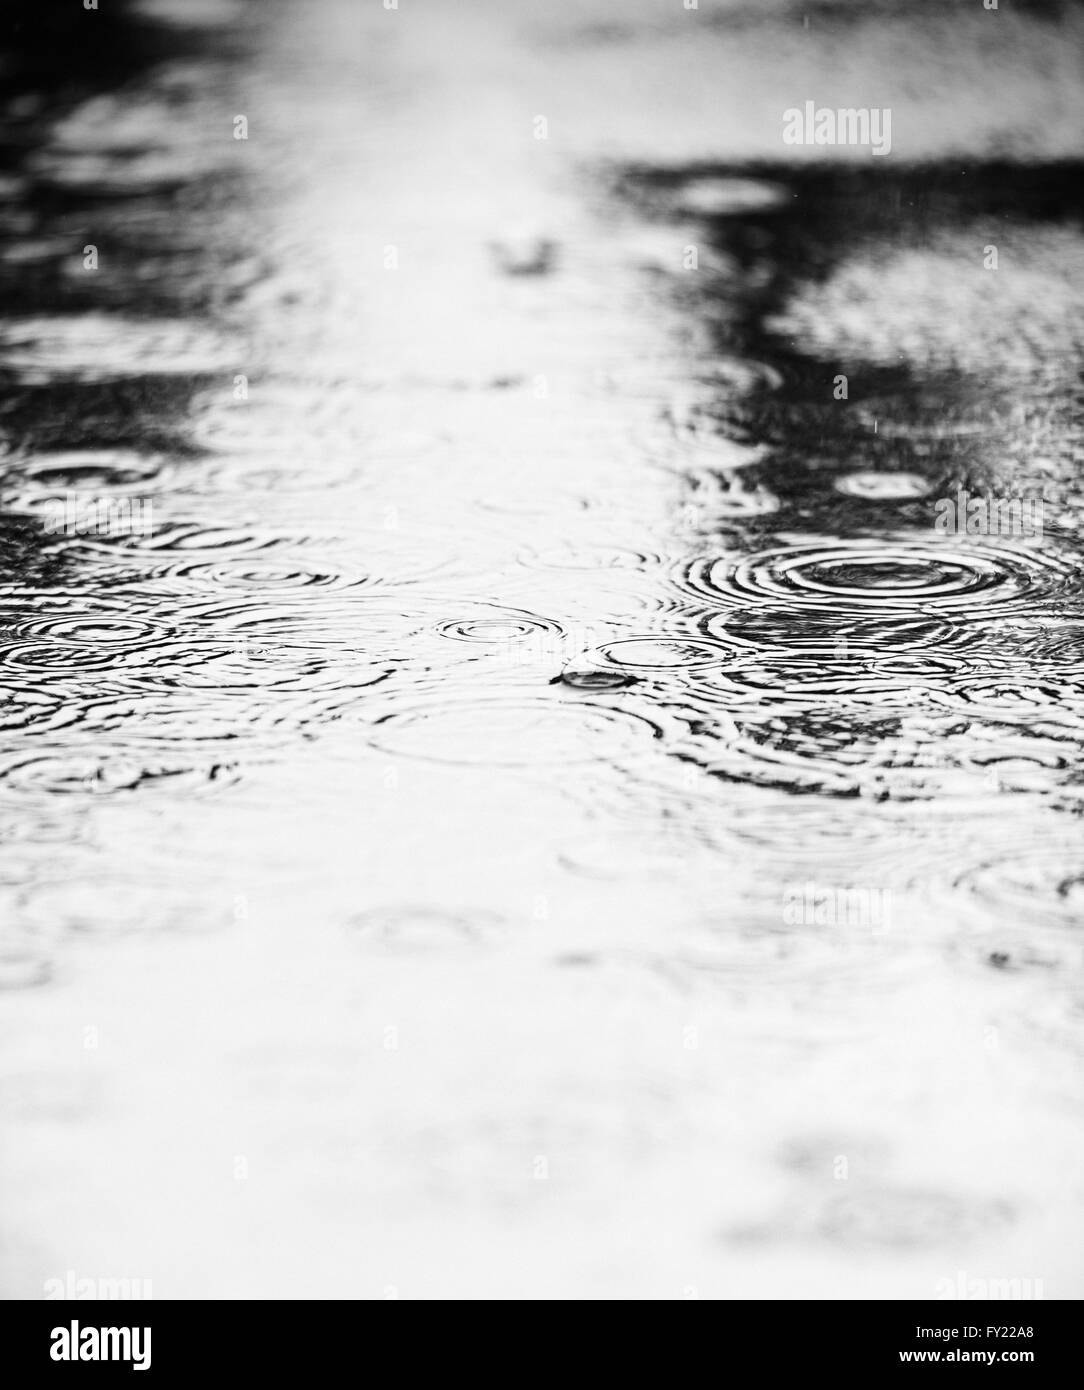 Water puddle with rain drops falling Stock Photo